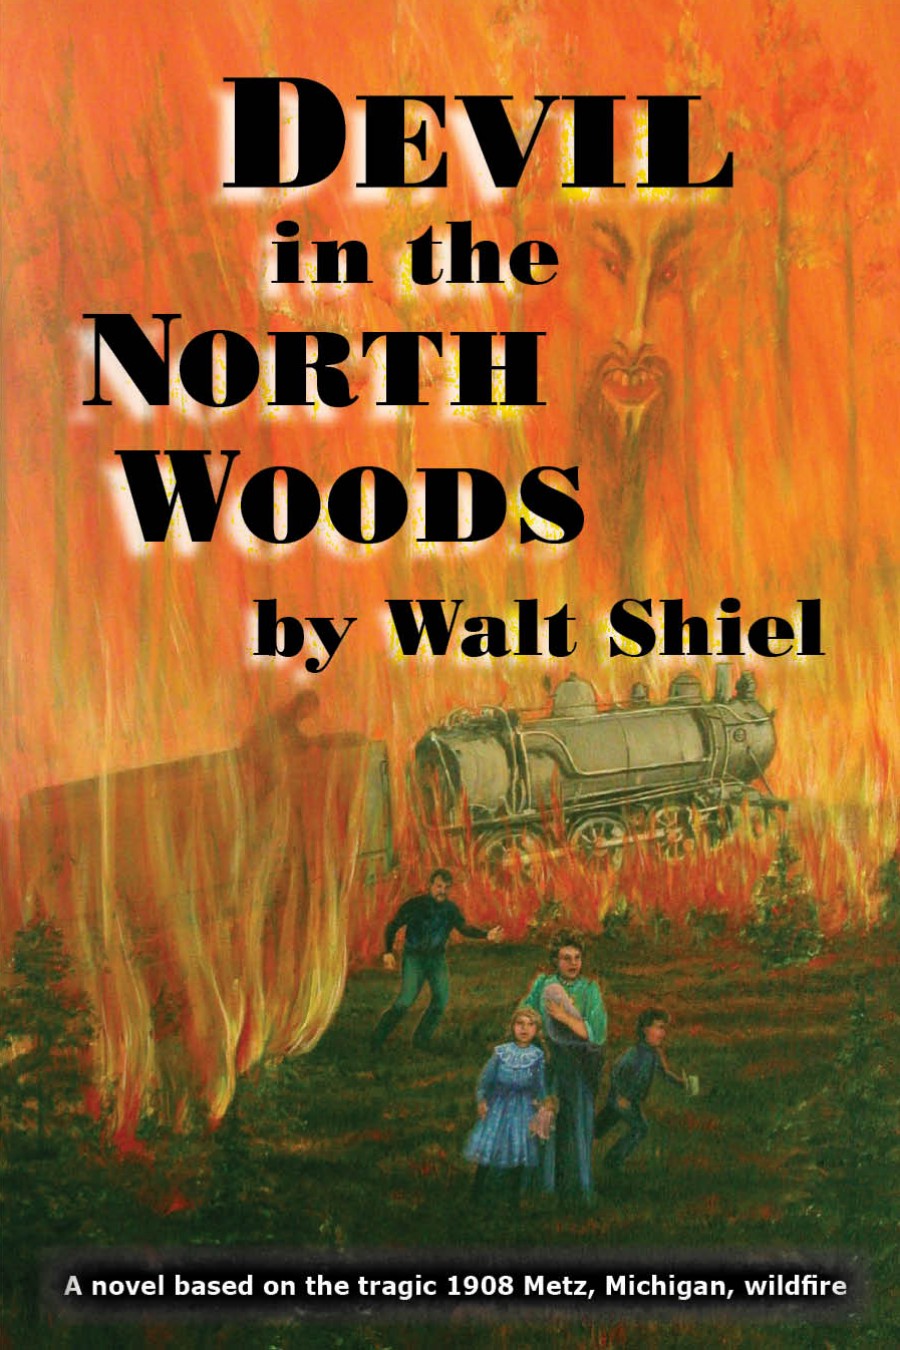 Devil in the North Woods: A novel of the tragic 1908 Metz, Michigan, wildfire